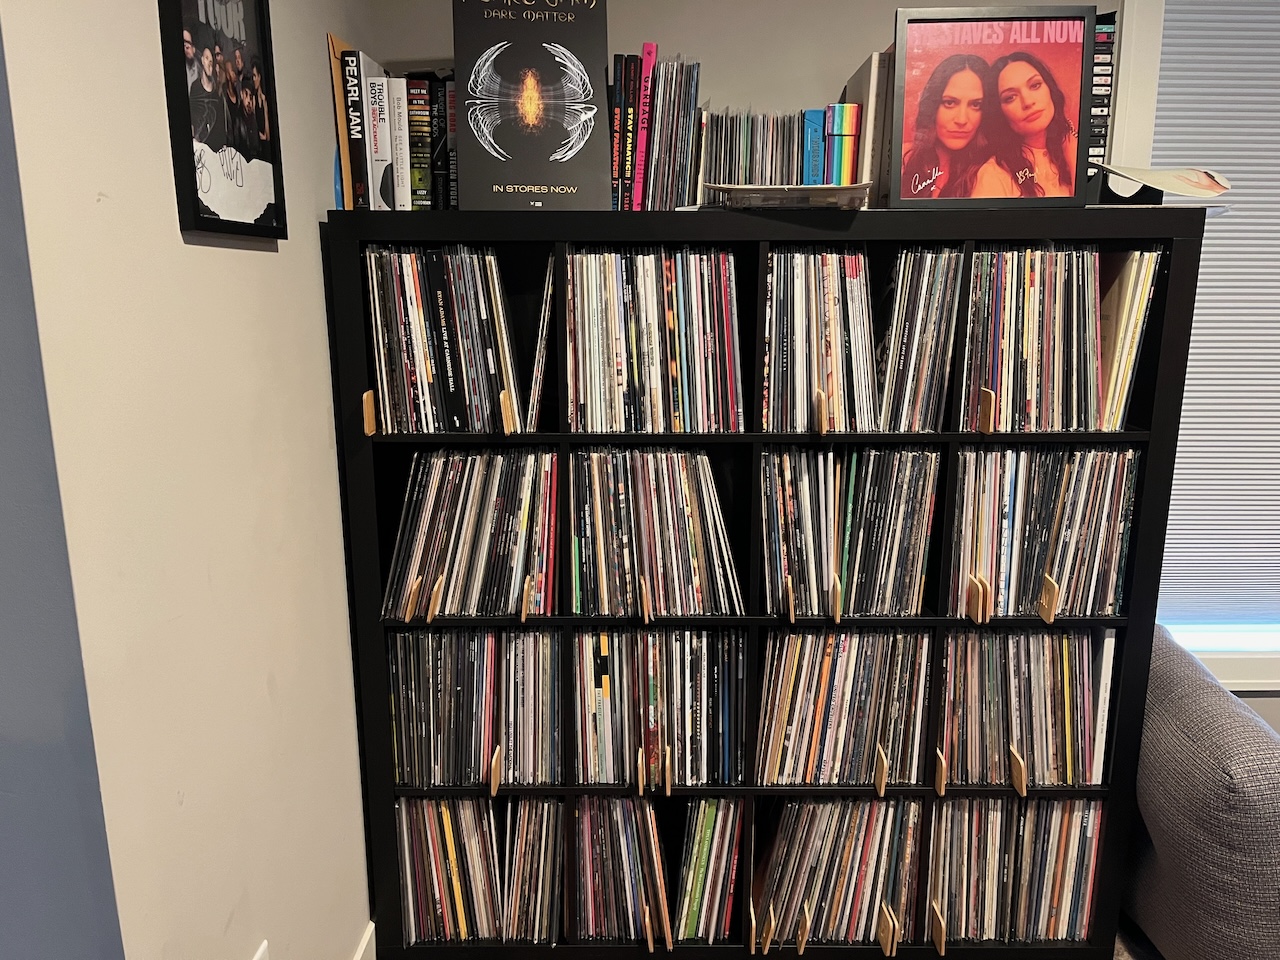 My record collection